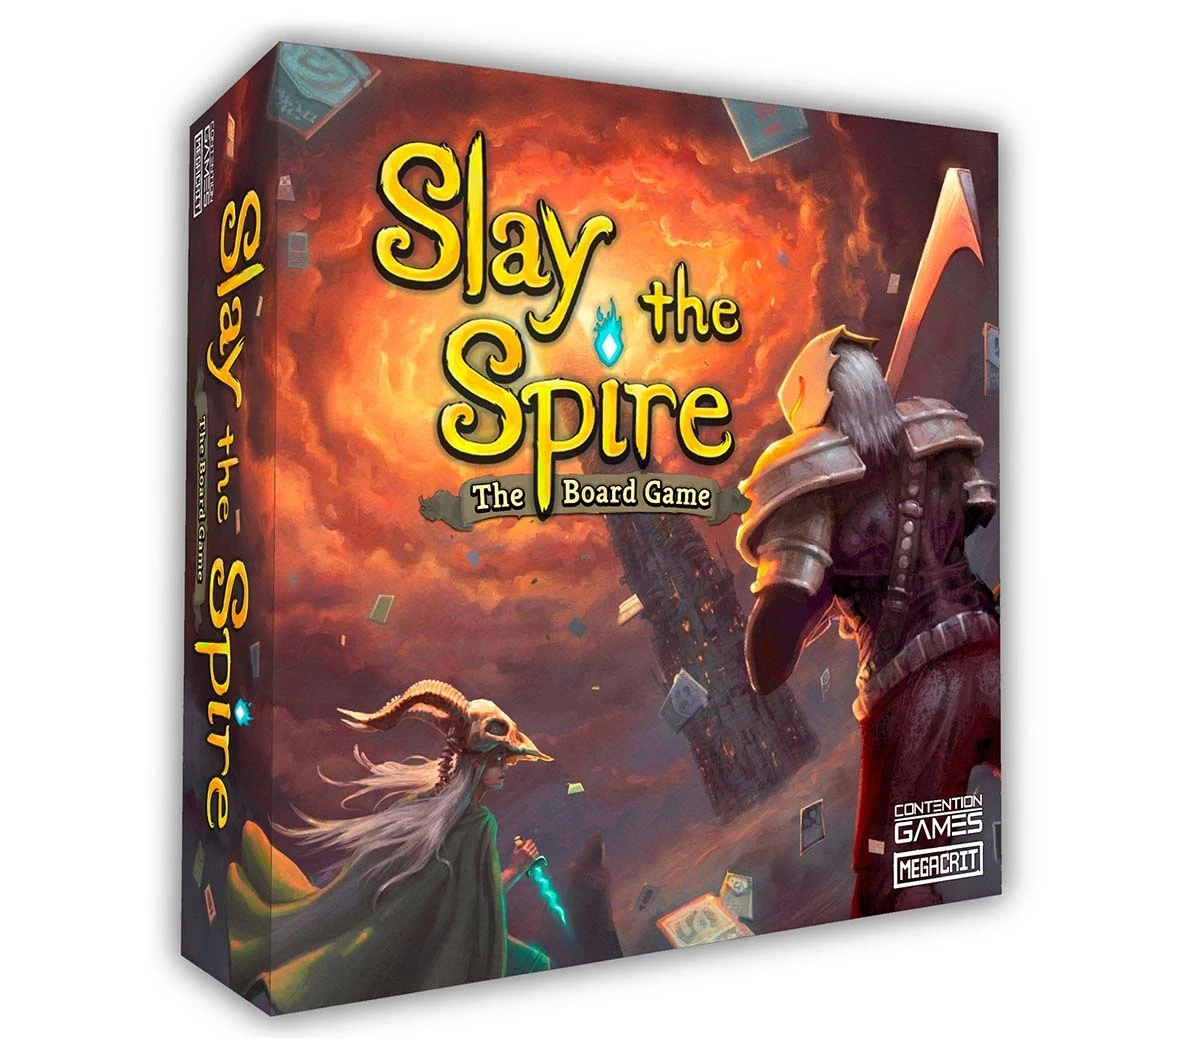 『Slay the Spire: the Board Game』／画像は公式Twitterから